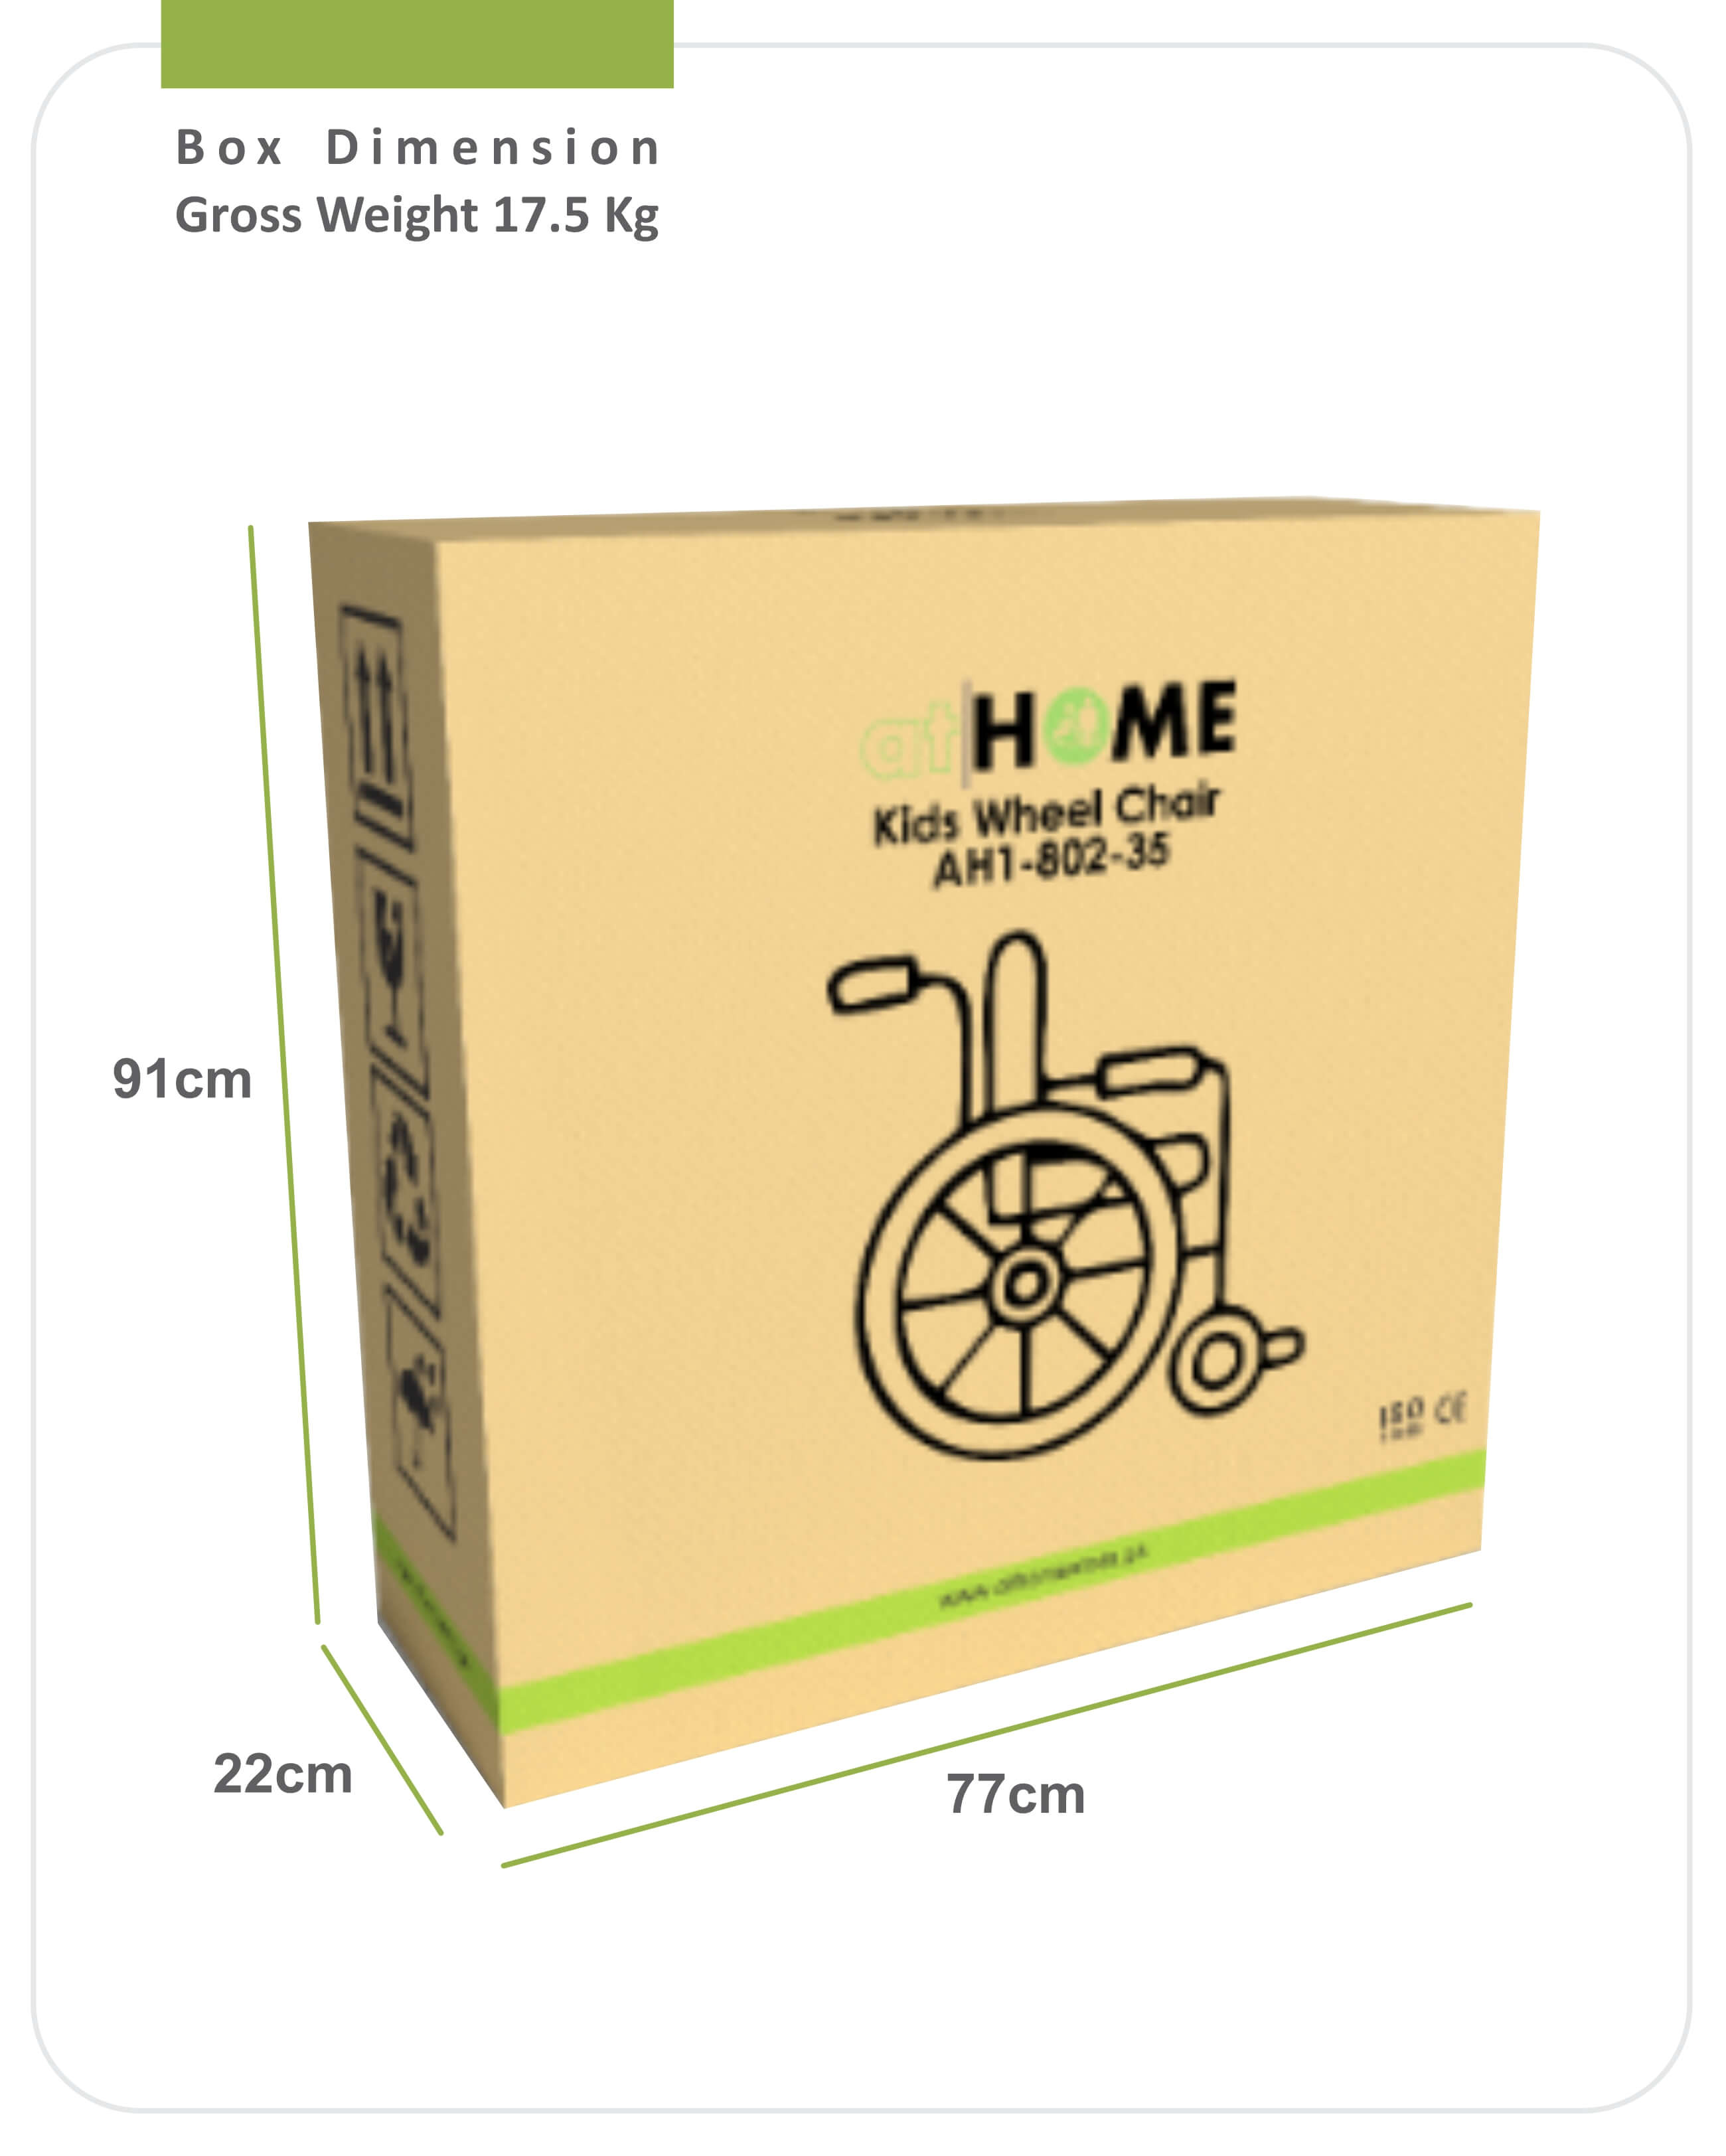 Kids Wheelchair - Pediatric Mobility Aid for Special Children